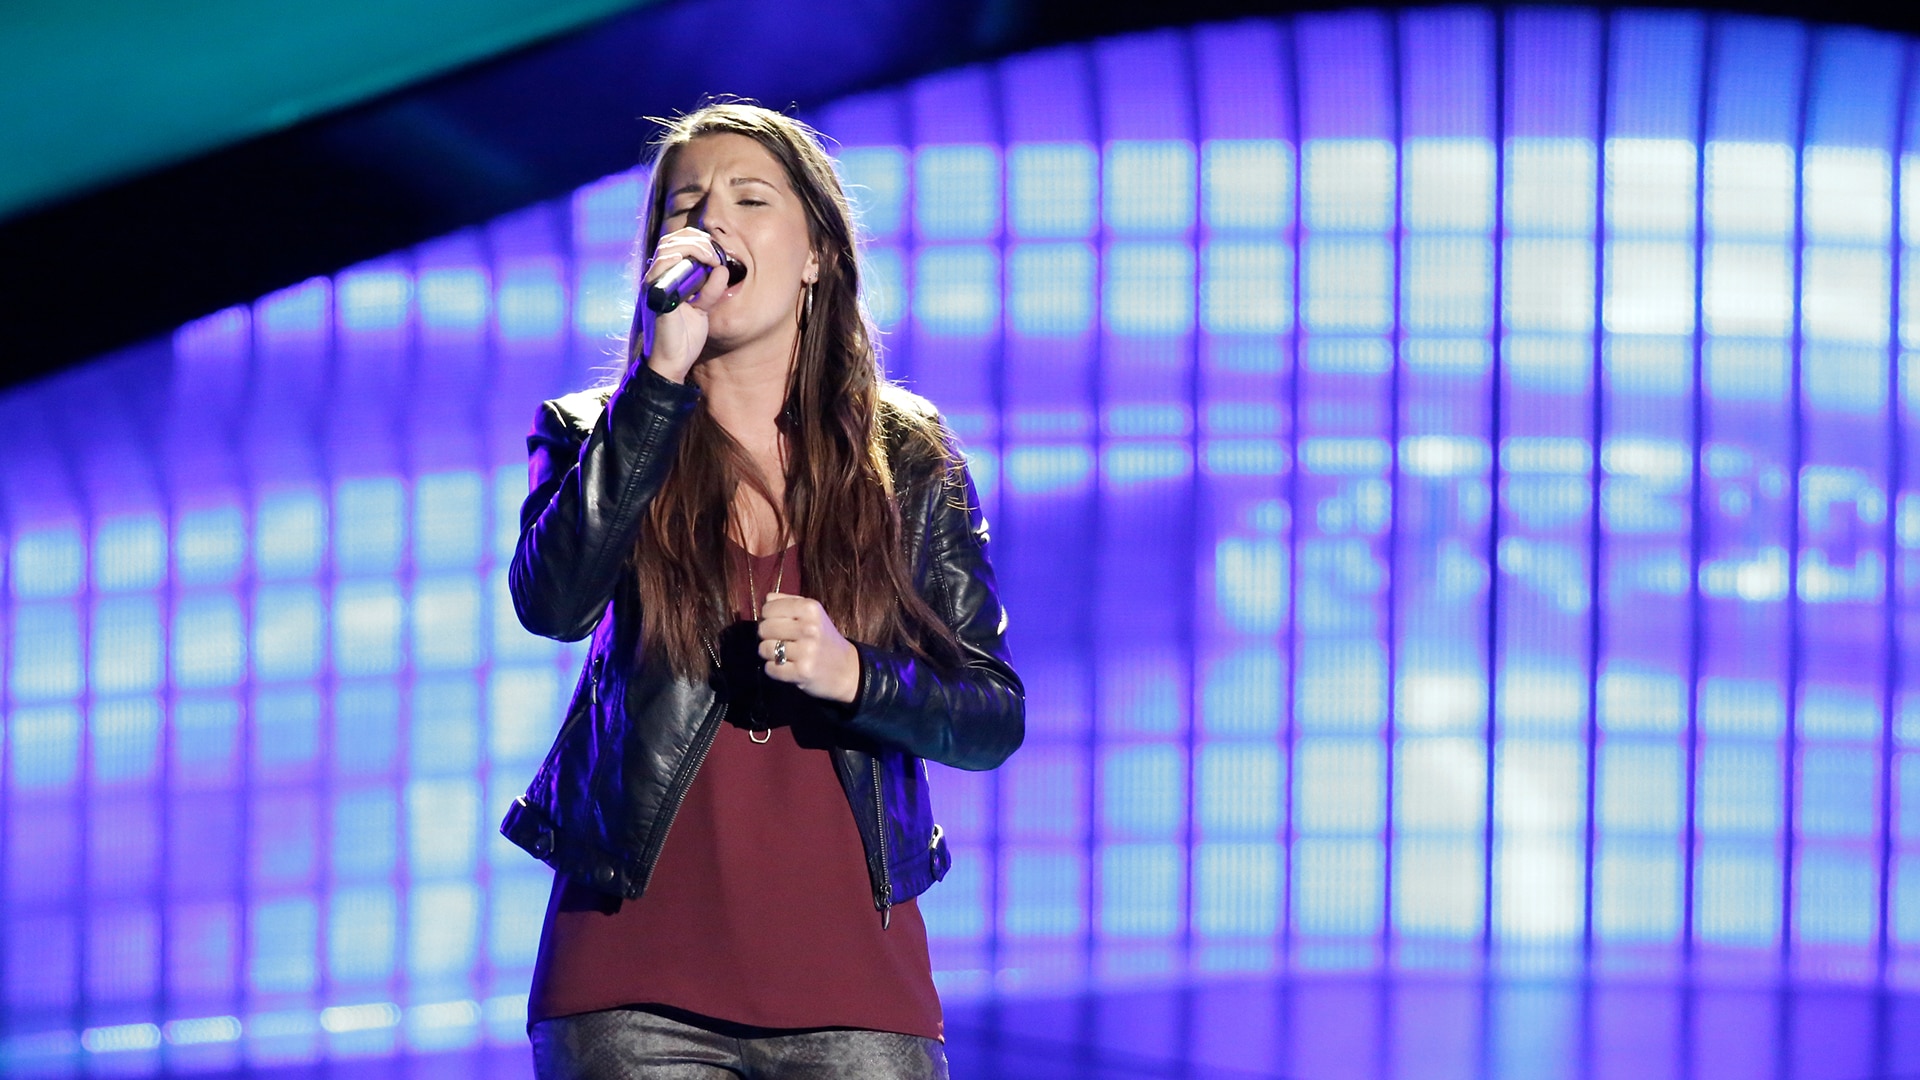 Watch The Voice Highlight: Sheena Brook Blind Audition: "Baby Girl